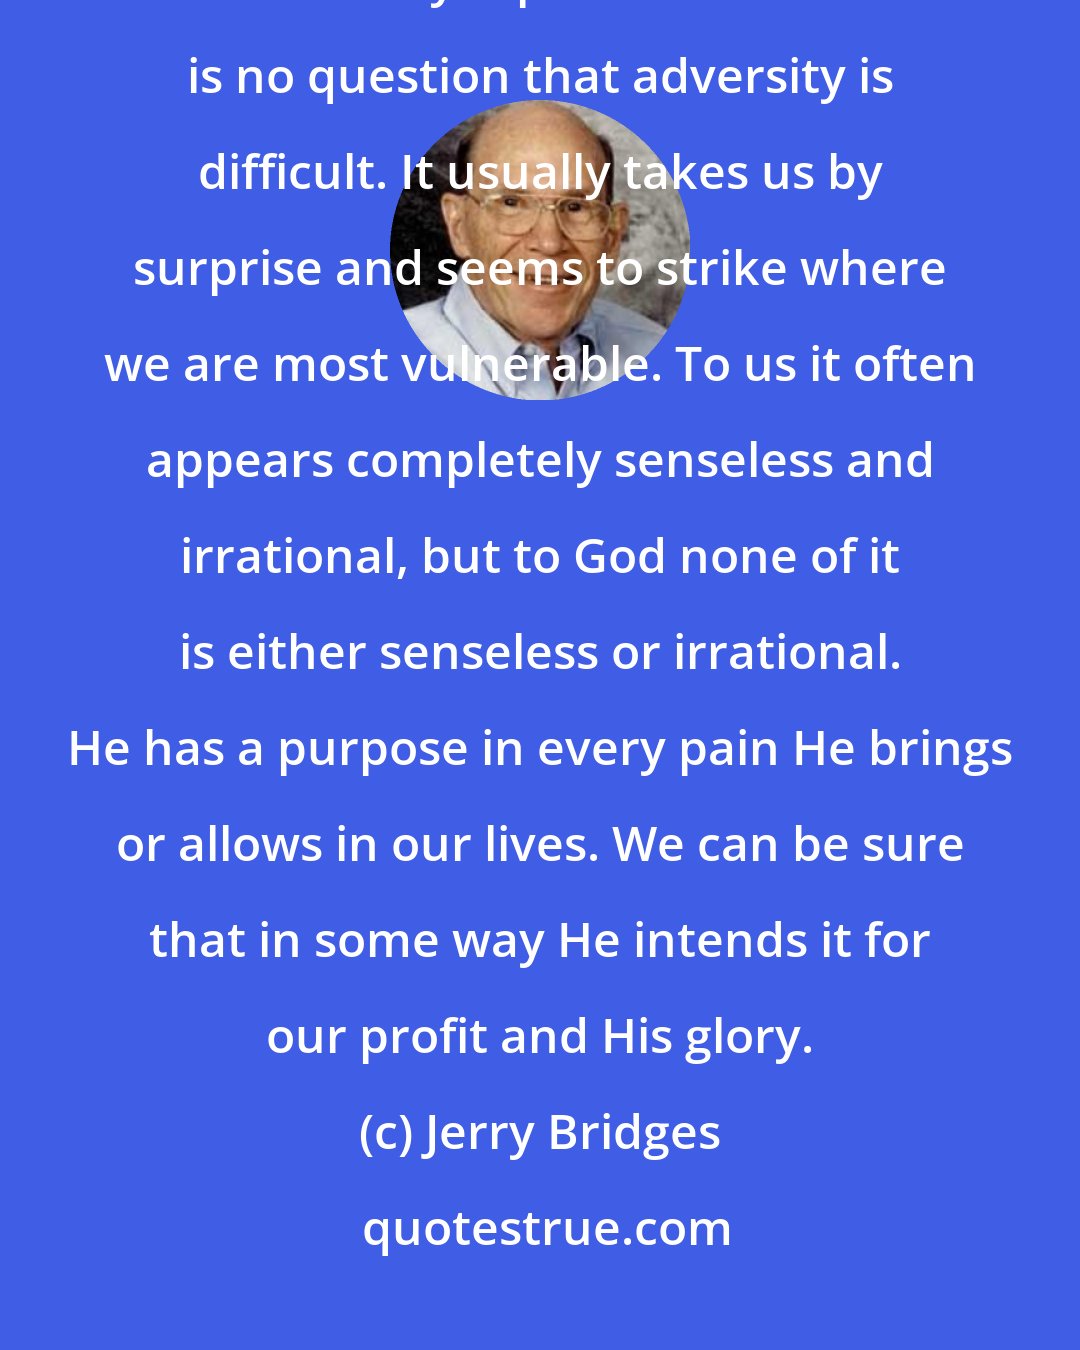 Jerry Bridges: One thing we may be sure of, however: For the believer all pain has meaning; all adversity is profitable. There is no question that adversity is difficult. It usually takes us by surprise and seems to strike where we are most vulnerable. To us it often appears completely senseless and irrational, but to God none of it is either senseless or irrational. He has a purpose in every pain He brings or allows in our lives. We can be sure that in some way He intends it for our profit and His glory.